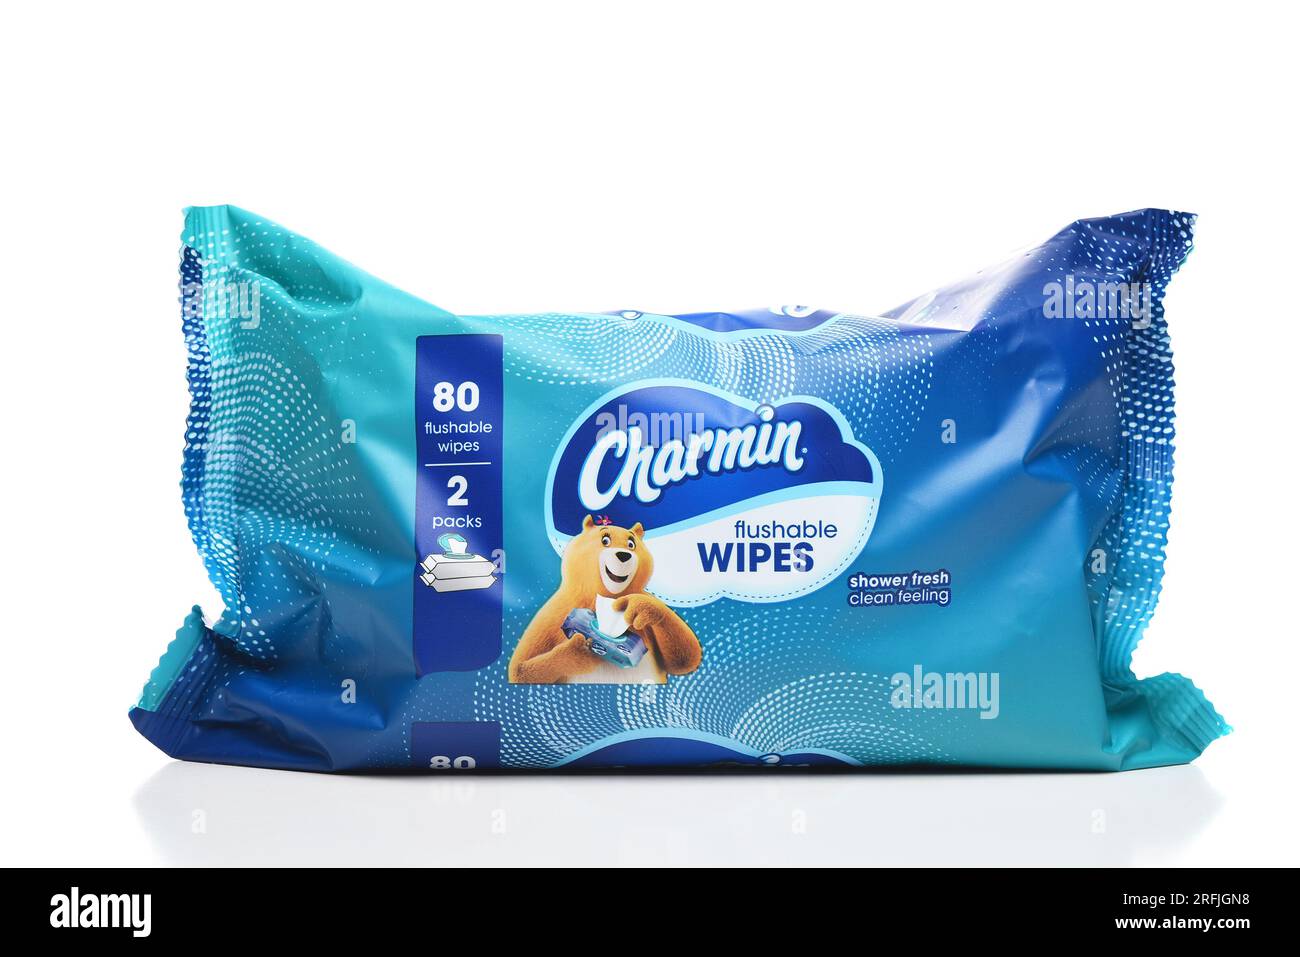 IRVINE, CALIFORNIA - 3 AUG 2023: A package of Charmin Flushable Wipes. Stock Photo